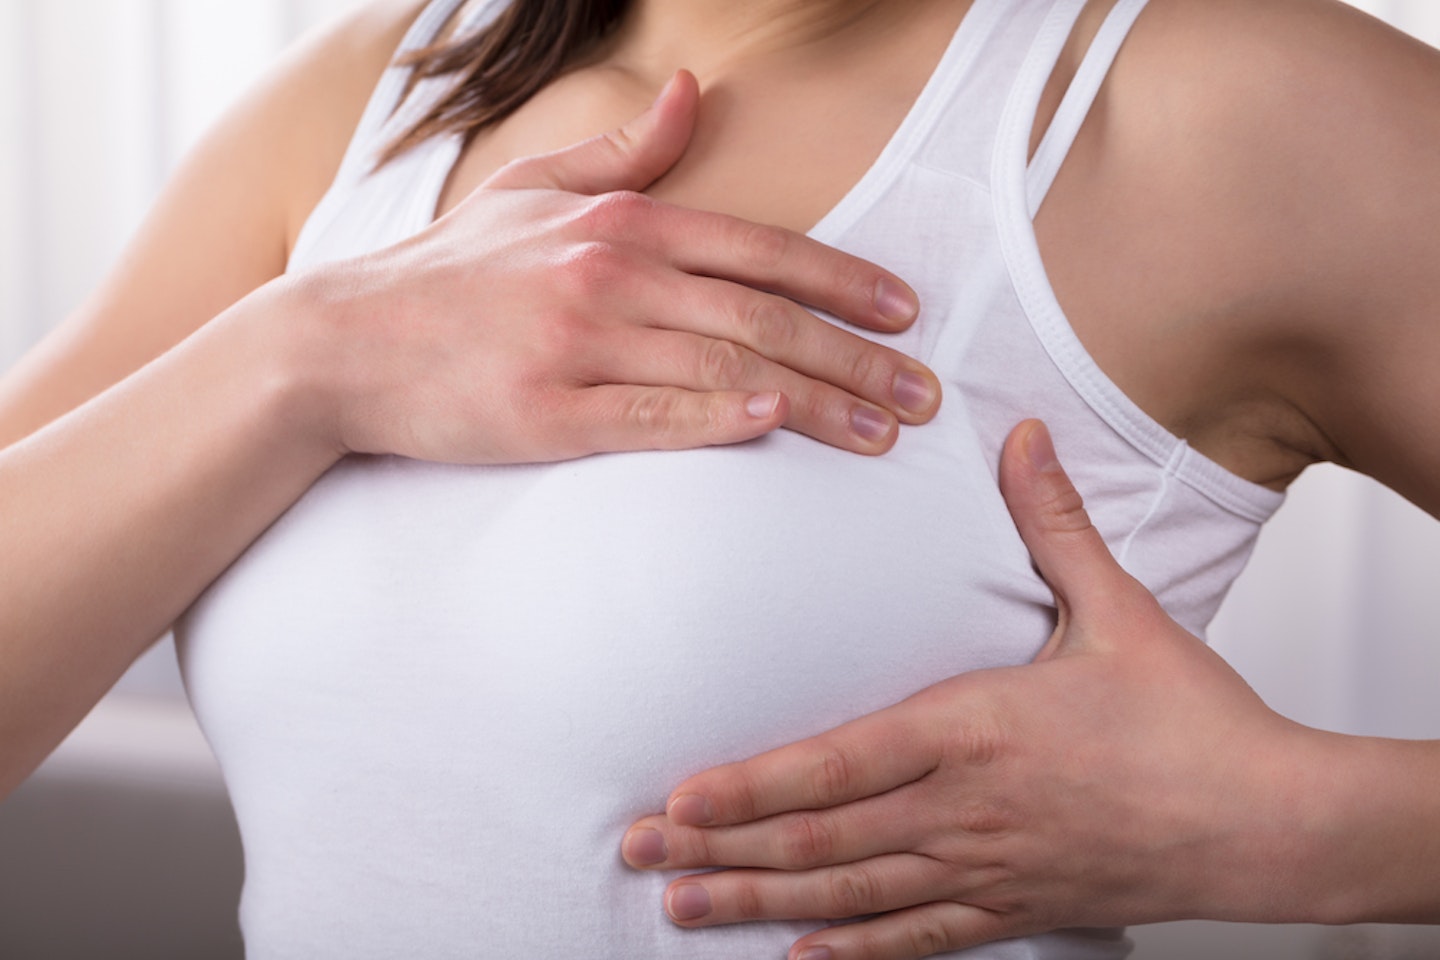 Breast Changes during Pregnancy